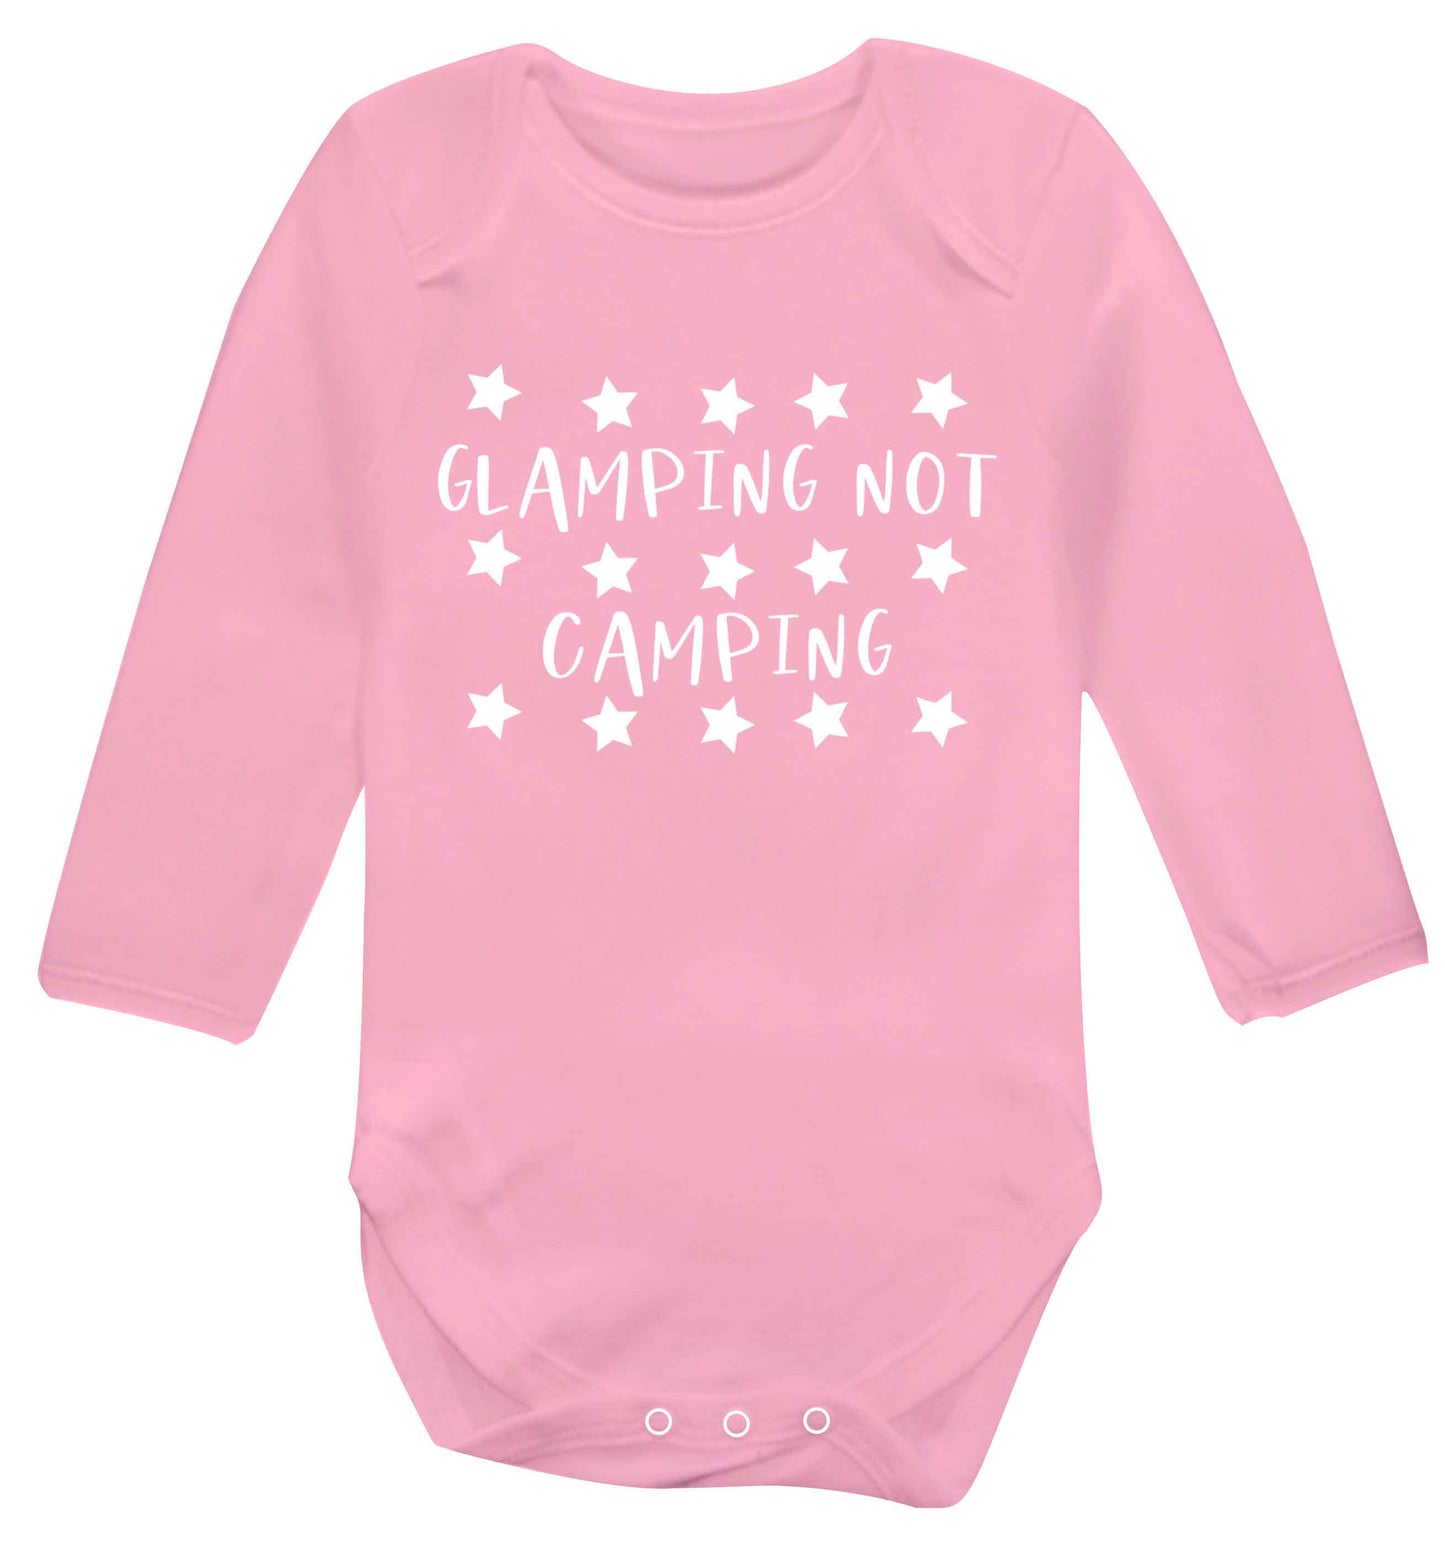 Glamping not camping Baby Vest long sleeved pale pink 6-12 months